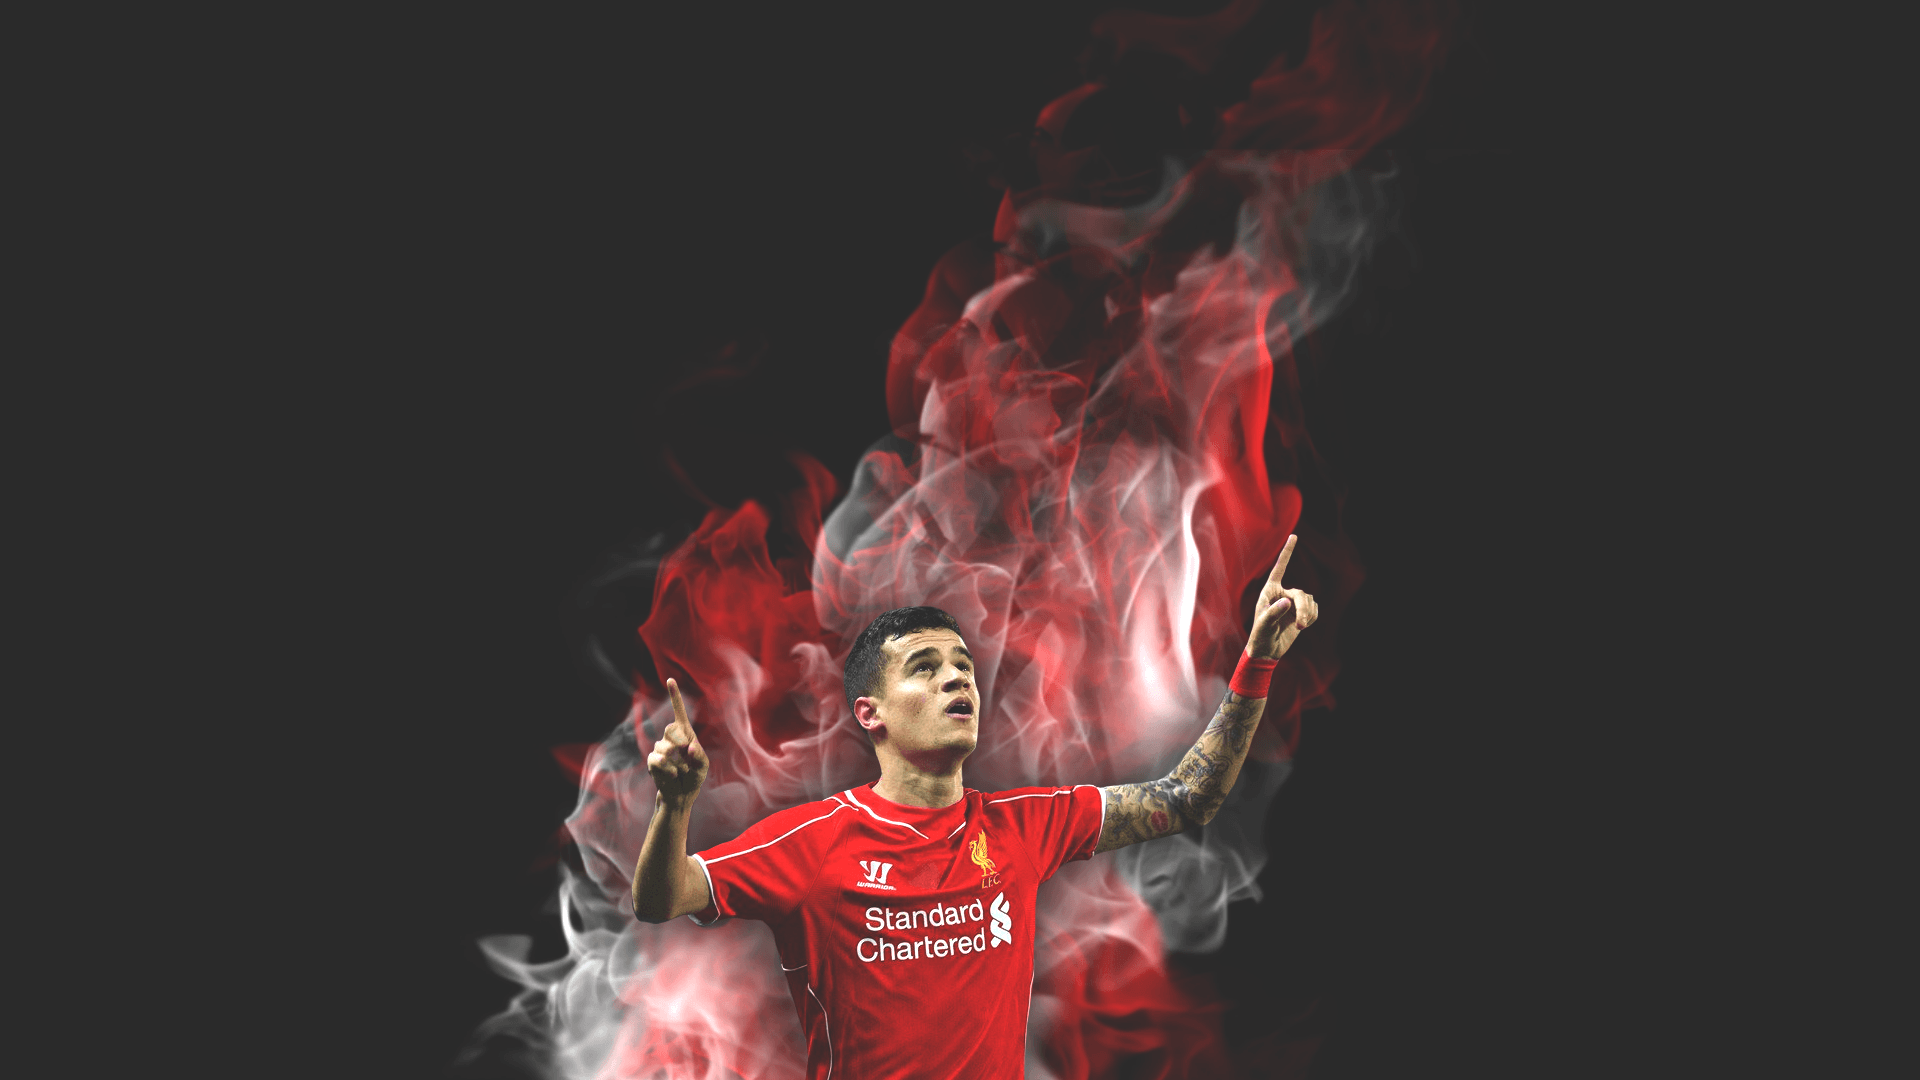 Made a Coutinho wallpaper if anyone is interested. 1920x1080